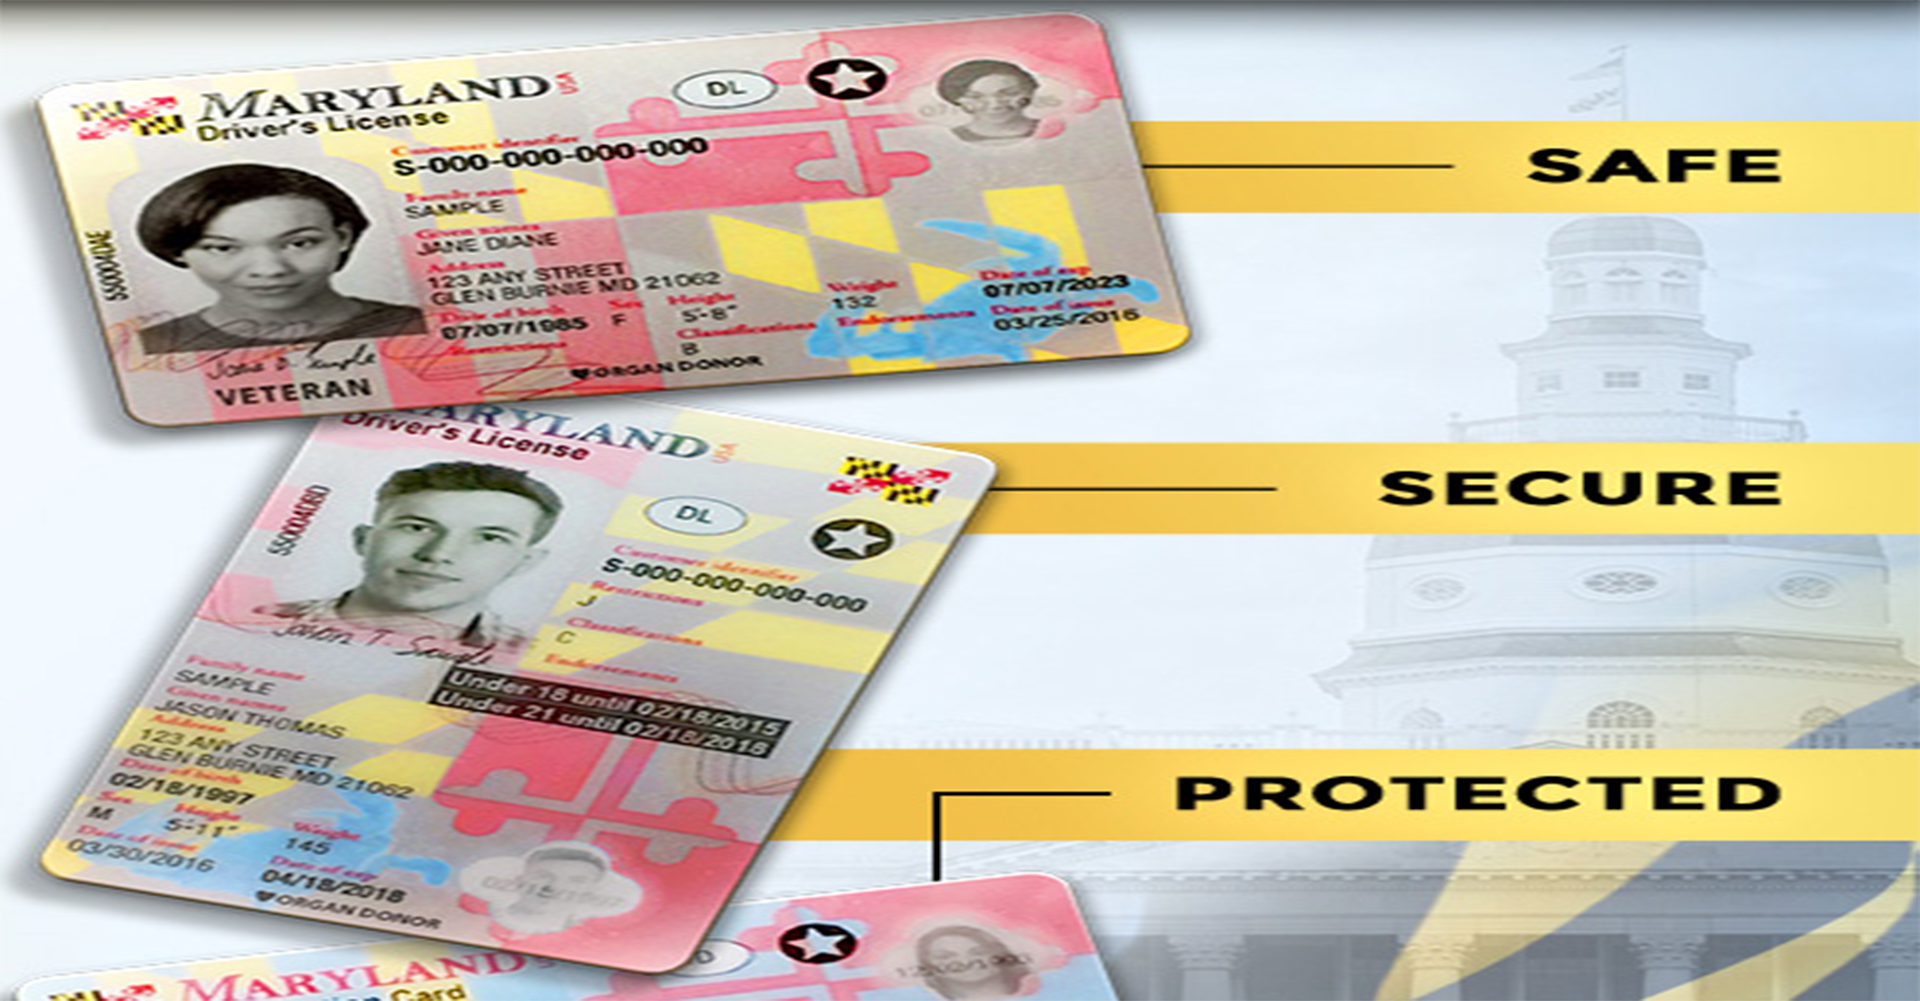 Driver’s license, learner’s permit and identification (ID) card redesigned completely to avoid identity theft and counterfeiting.